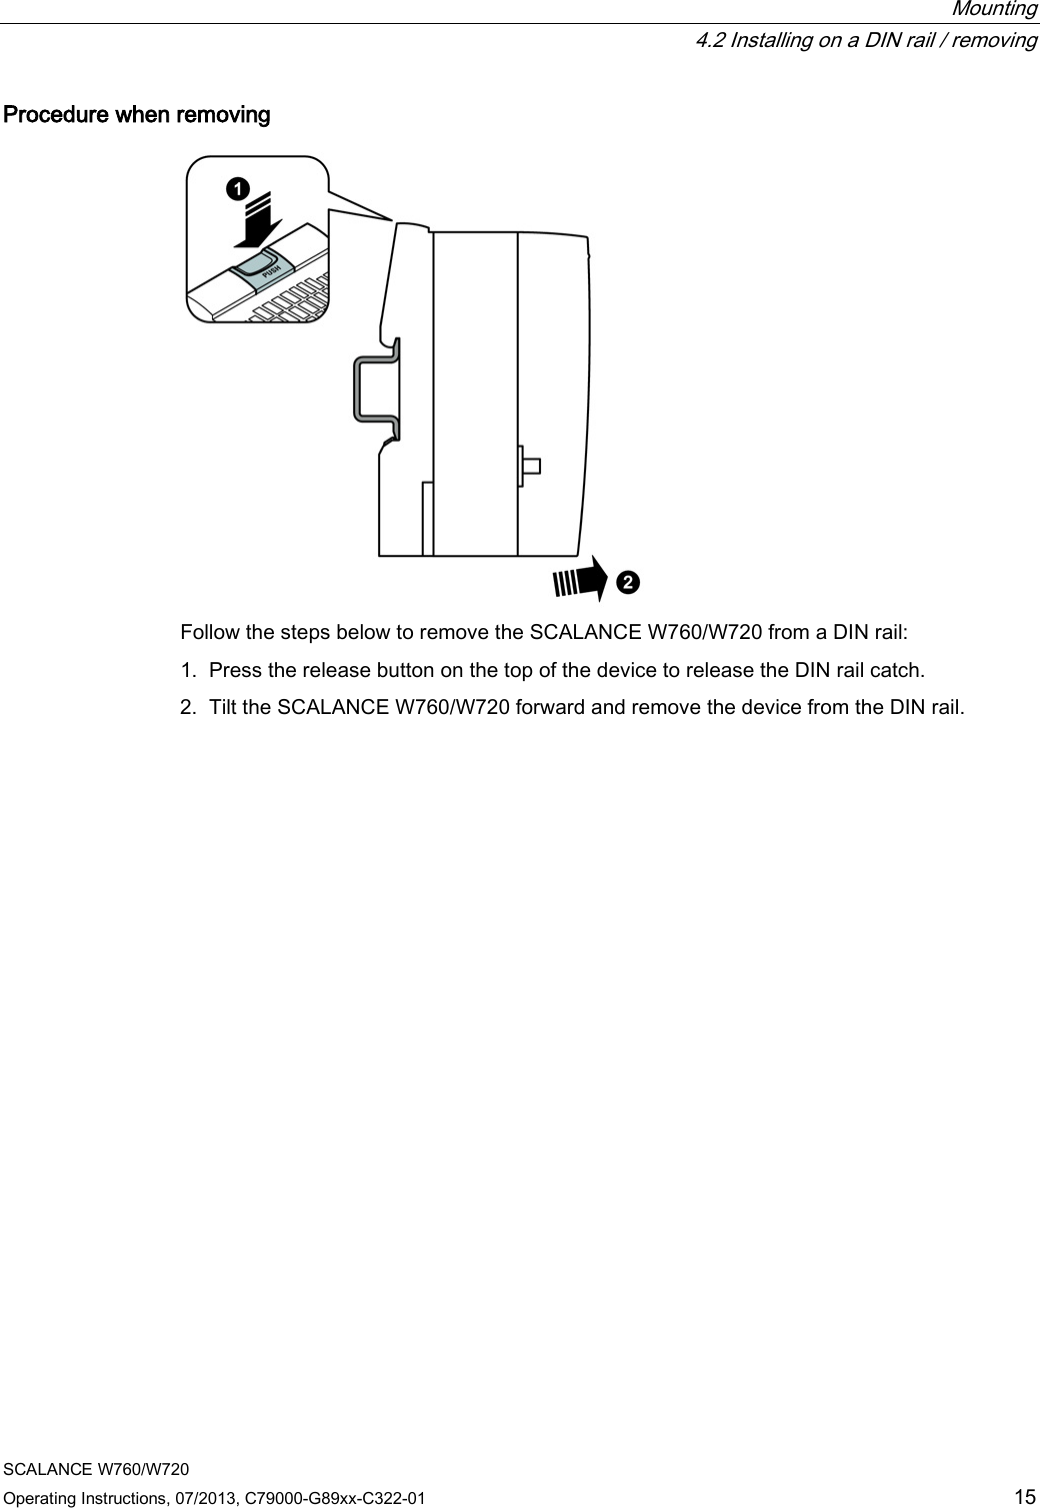  Mounting  4.2 Installing on a DIN rail / removing SCALANCE W760/W720 Operating Instructions, 07/2013, C79000-G89xx-C322-01 15 Procedure when removing  Follow the steps below to remove the SCALANCE W760/W720 from a DIN rail: 1. Press the release button on the top of the device to release the DIN rail catch. 2. Tilt the SCALANCE W760/W720 forward and remove the device from the DIN rail. 